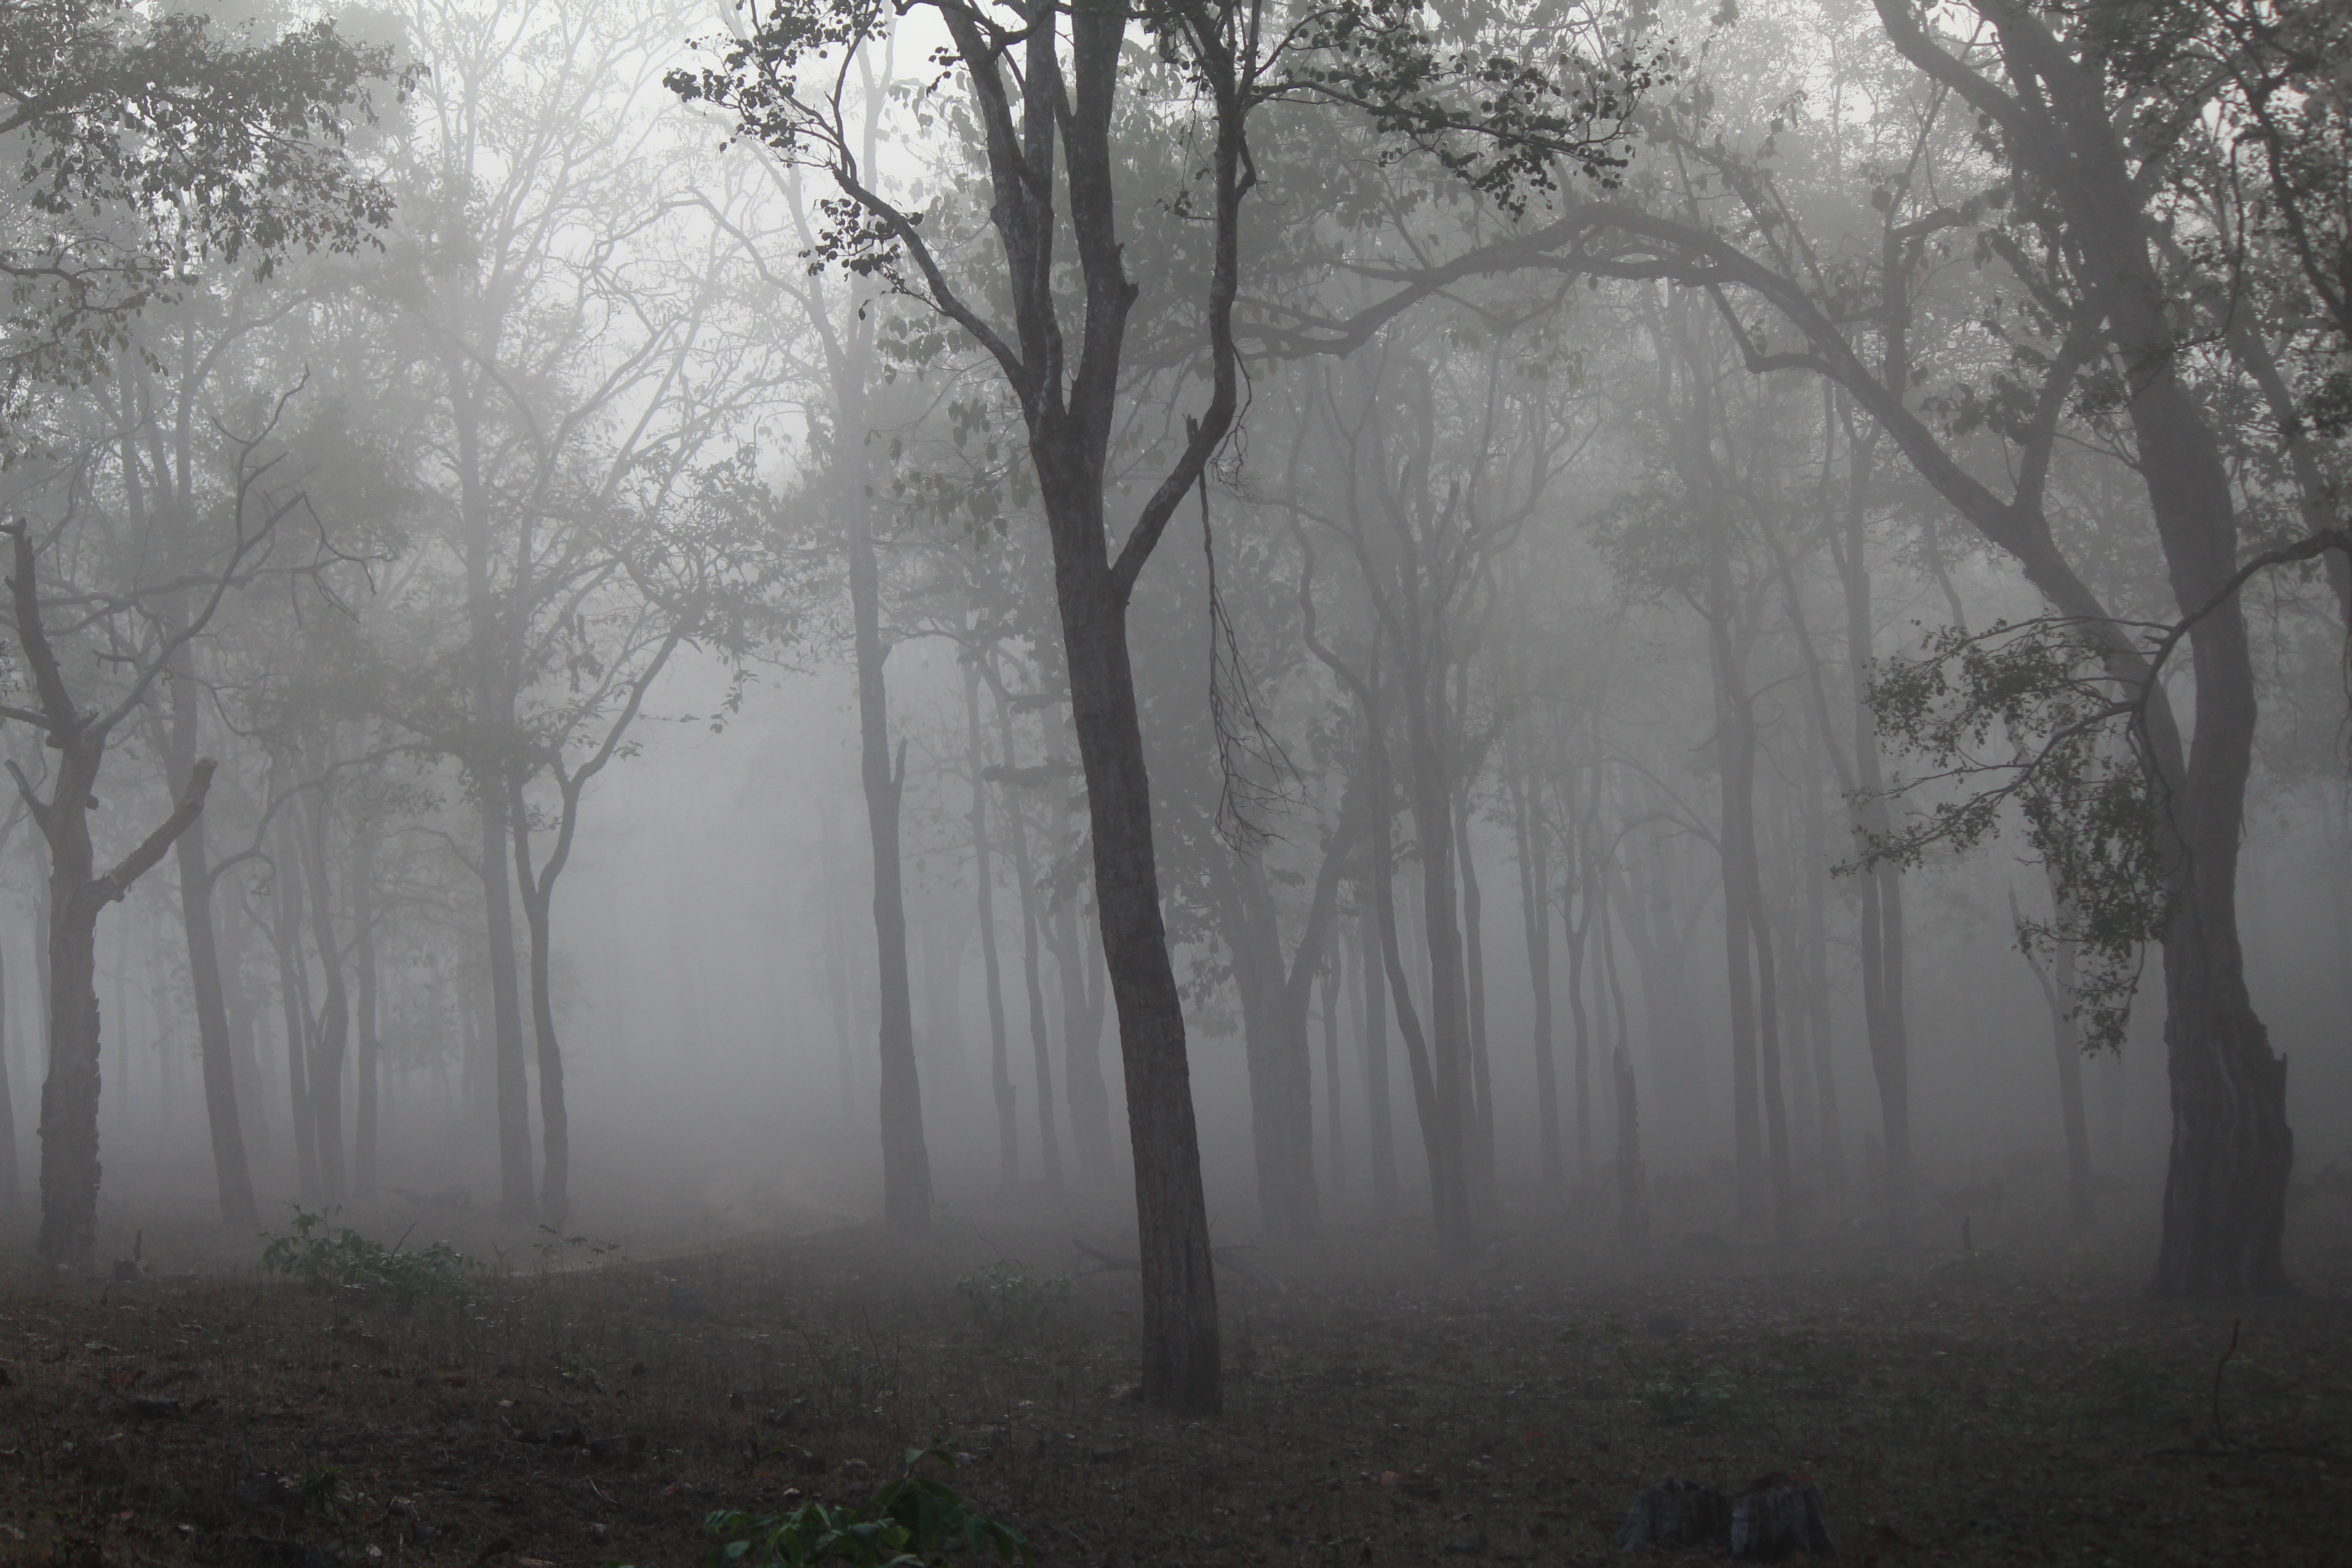 File:Foggy forest.jpg - Wikimedia Commons